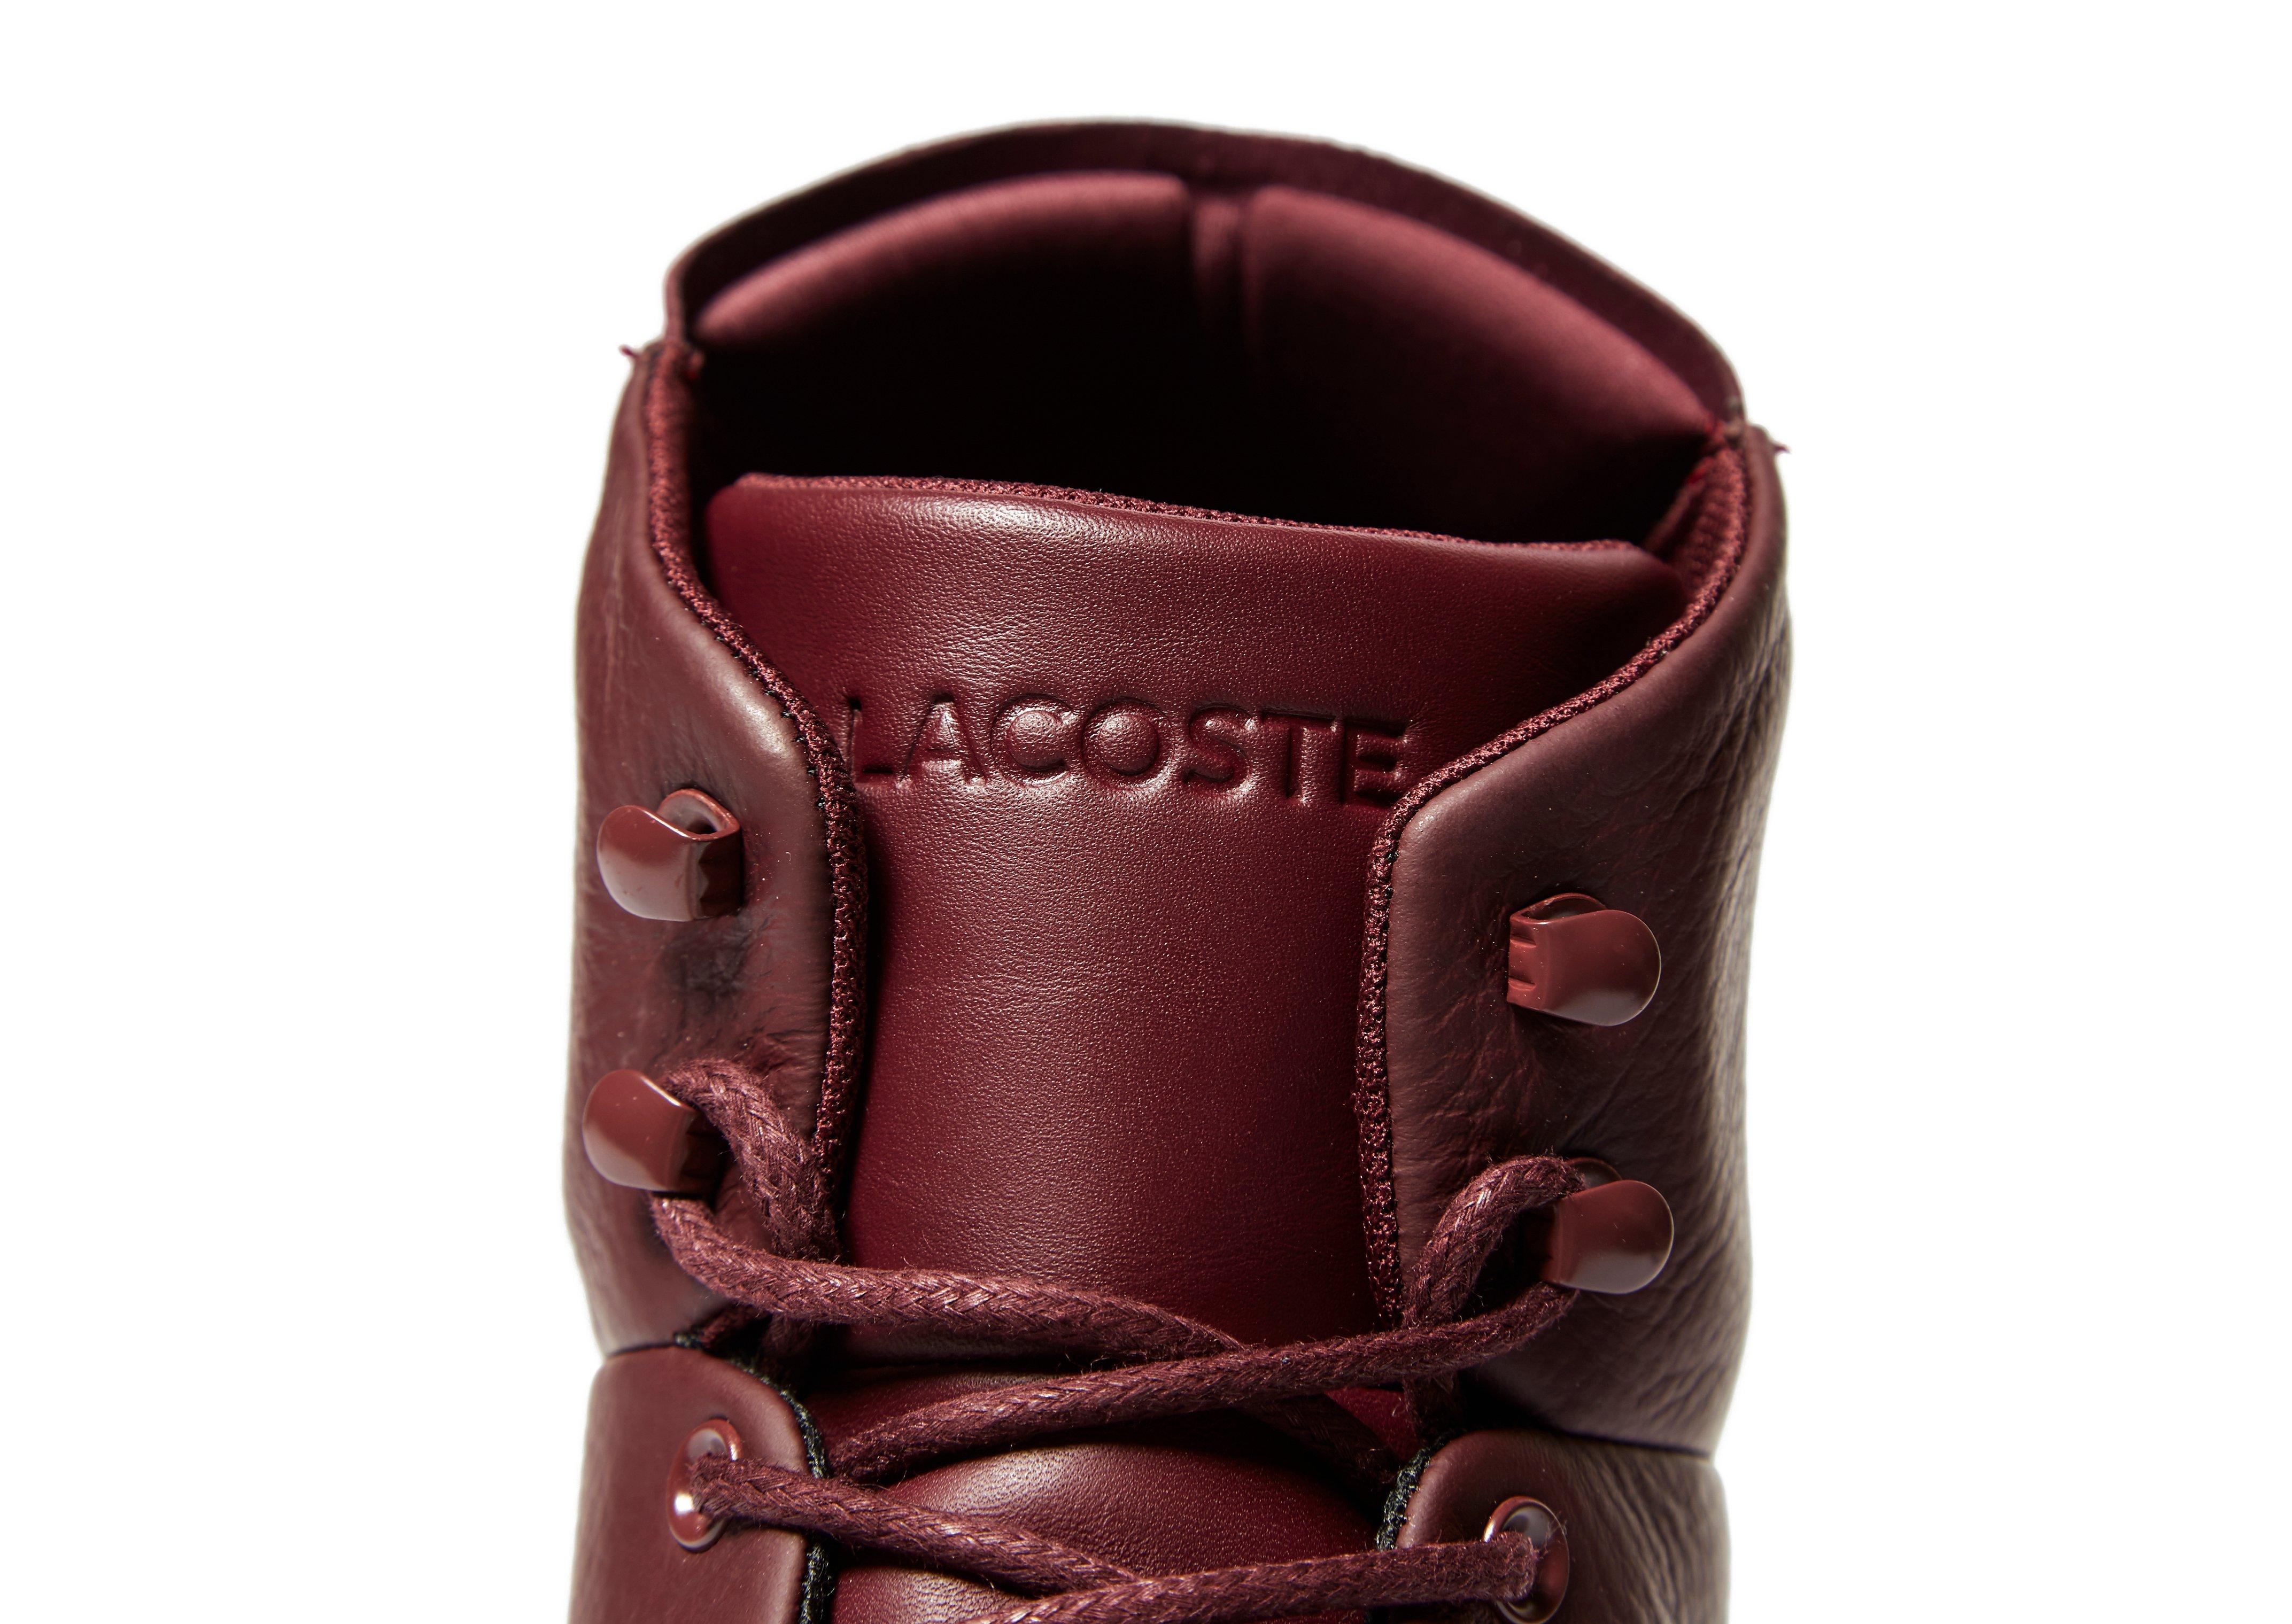 lacoste leather high tops